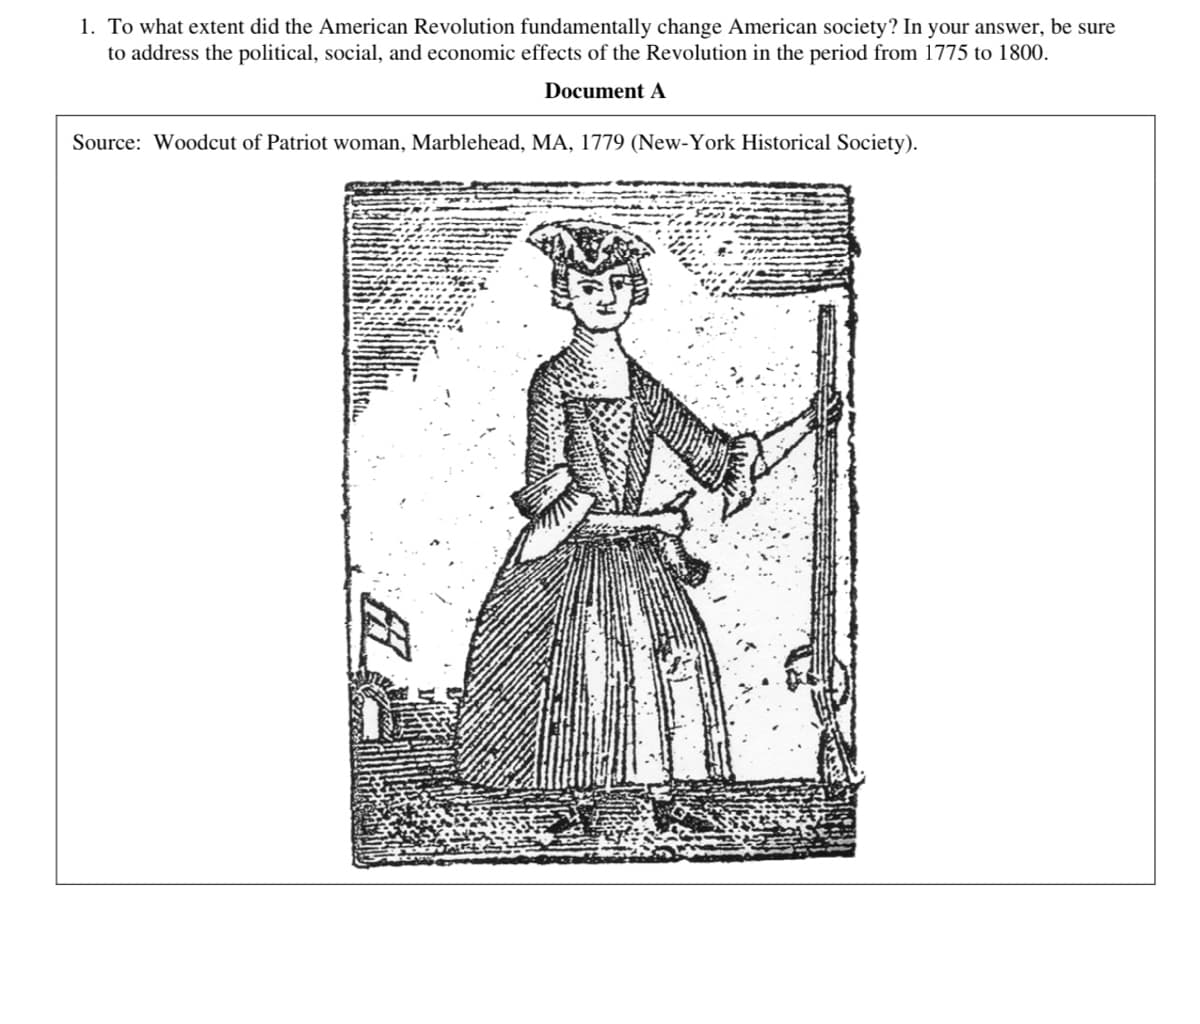 1. To what extent did the American Revolution fundamentally change American society? In your answer, be sure
to address the political, social, and economic effects of the Revolution in the period from 1775 to 1800.
Document A
Source: Woodcut of Patriot woman, Marblehead, MA, 1779 (New-York Historical Society).